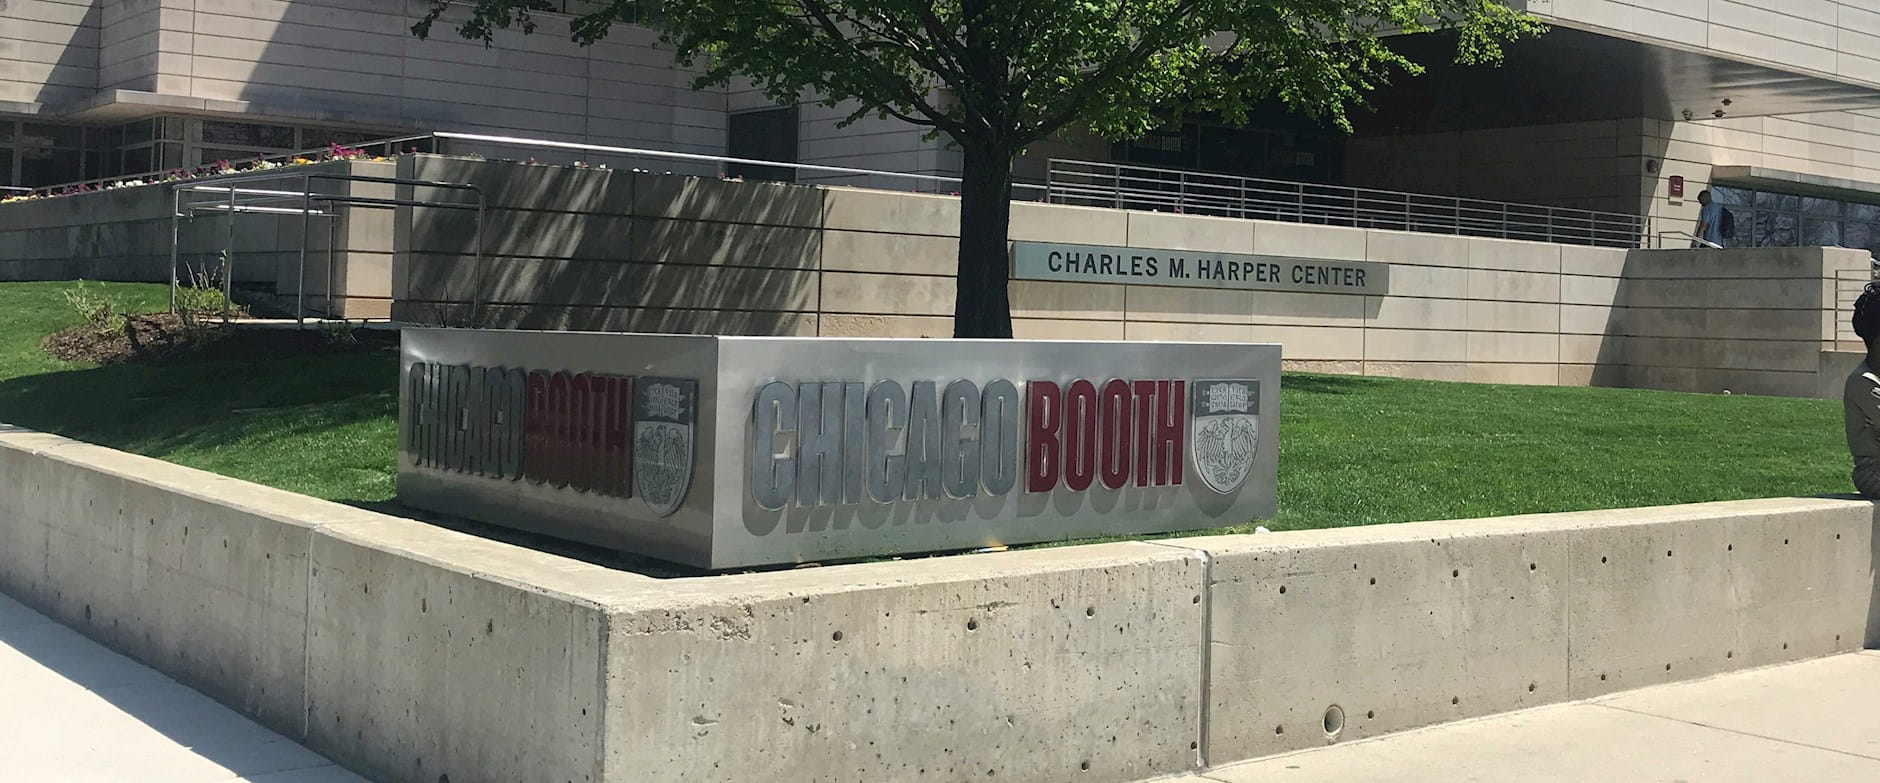 Chicago Booth Logo Sign